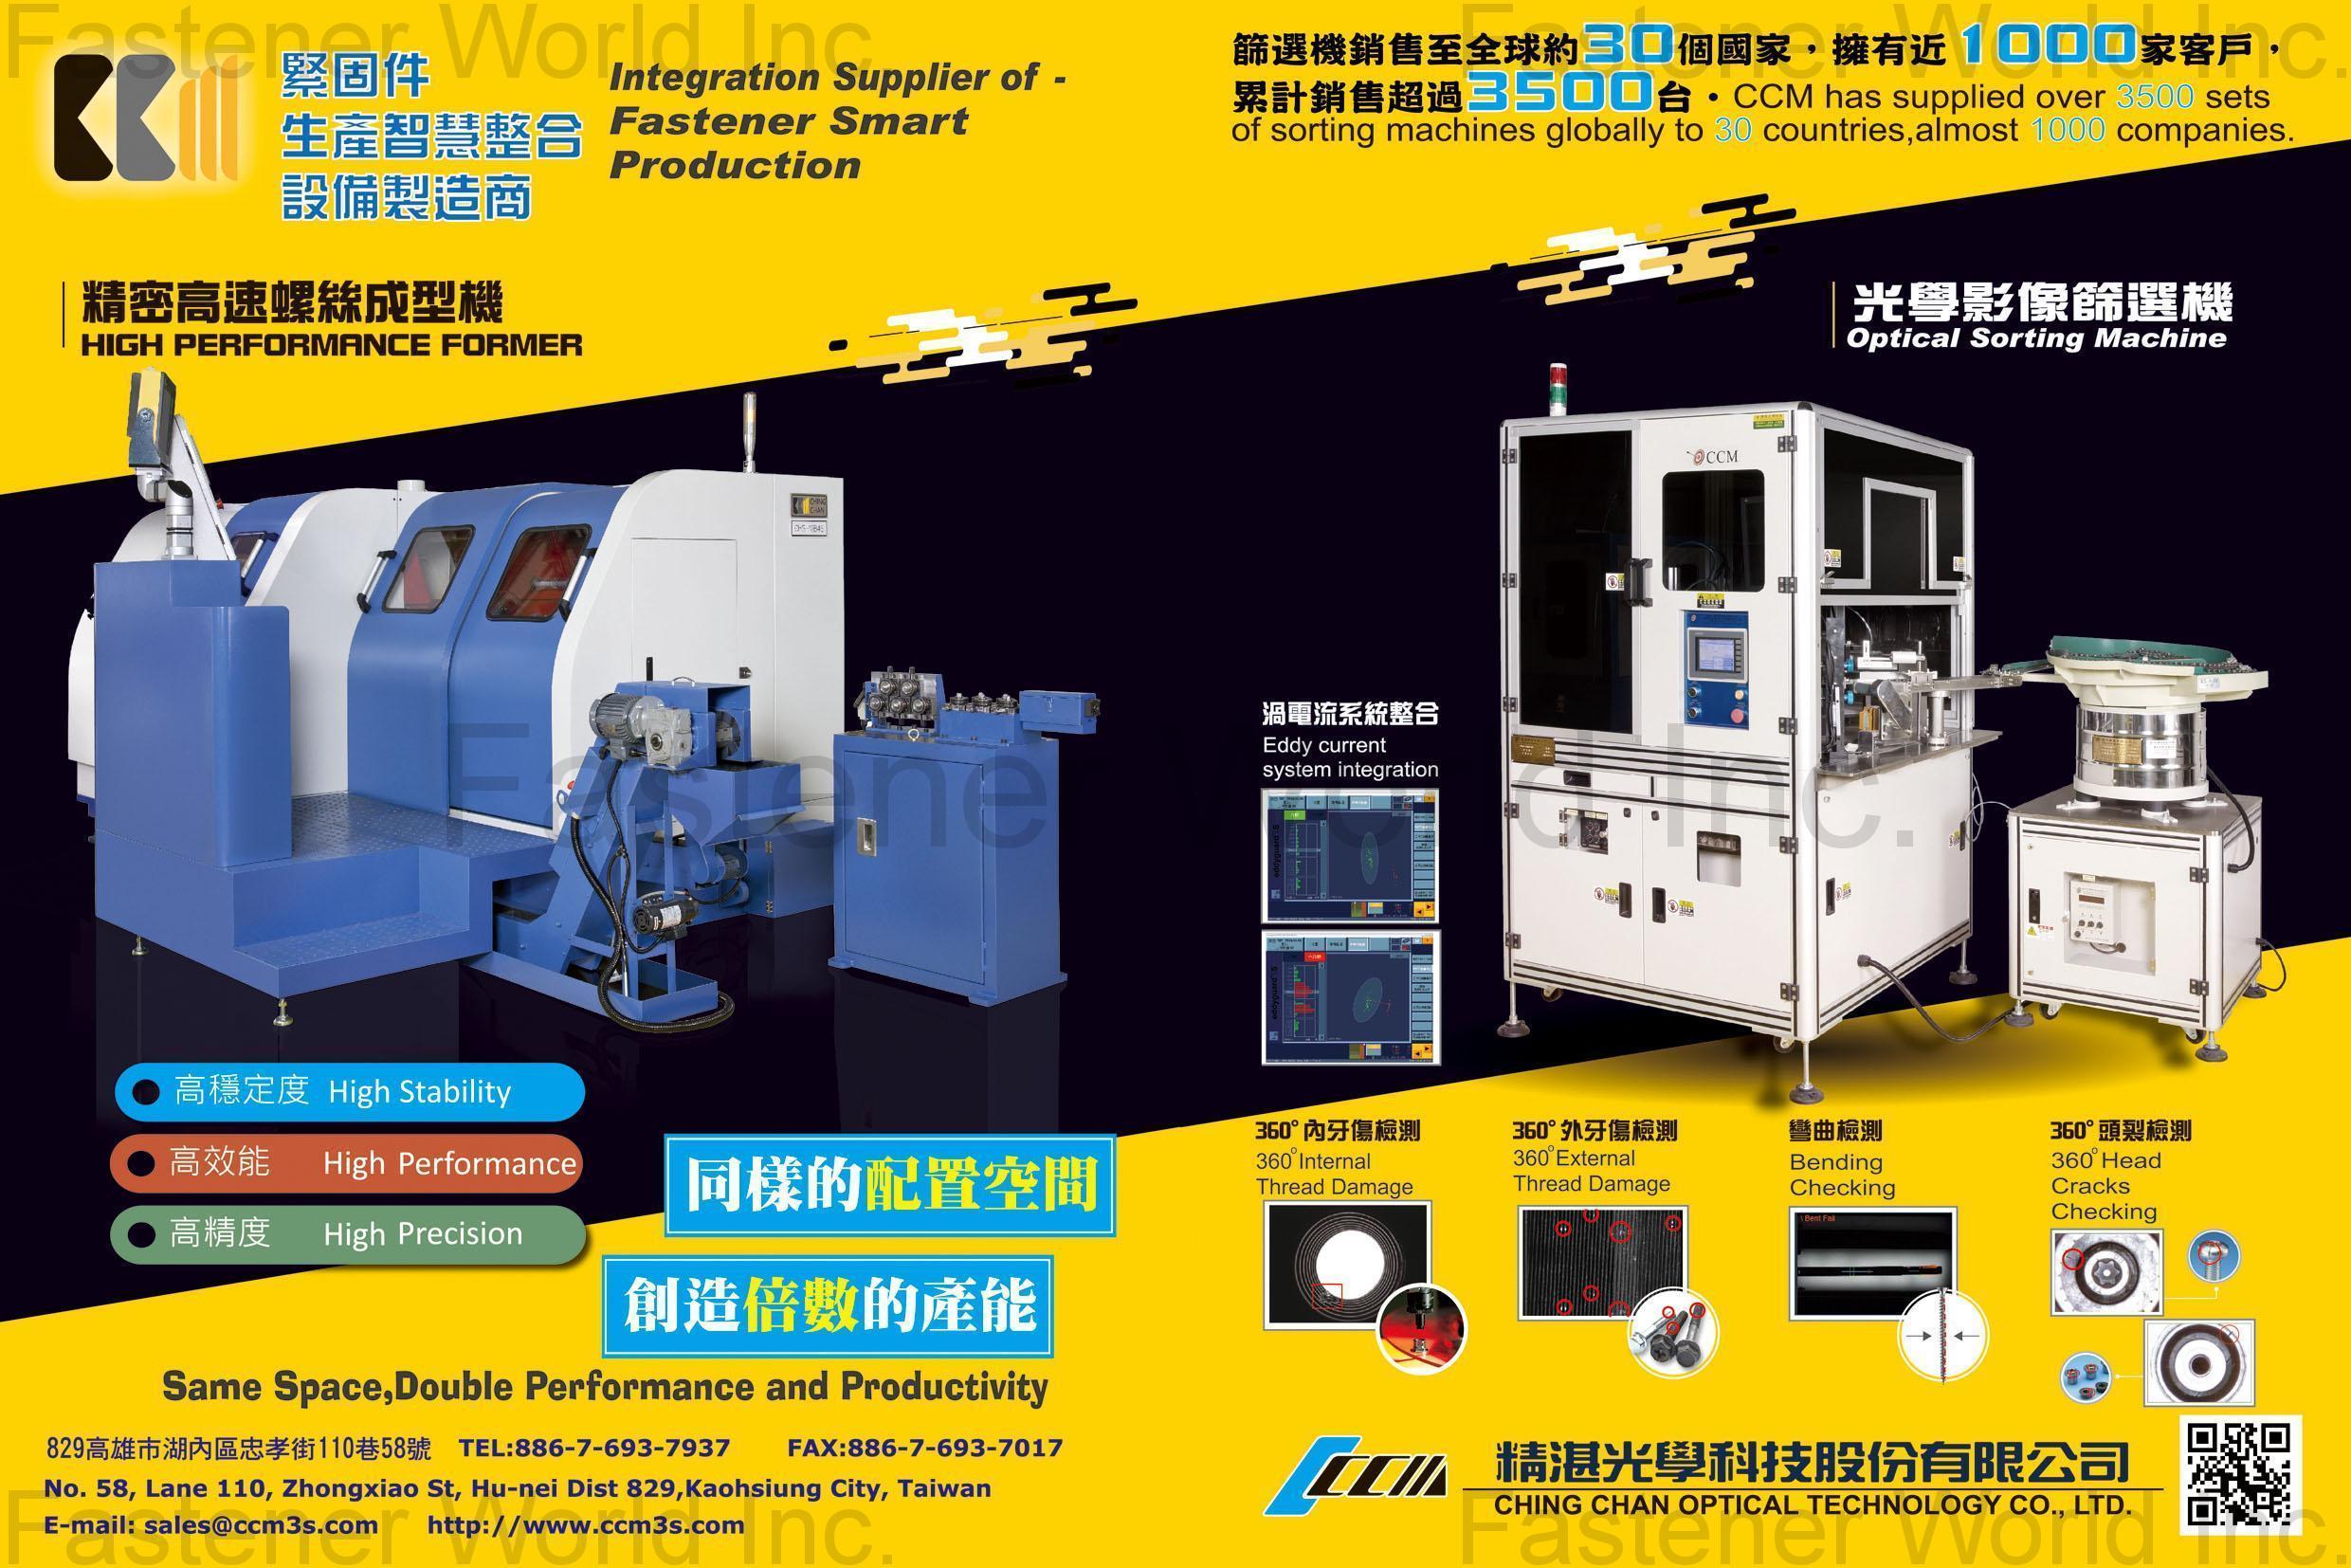 CHING CHAN OPTICAL TECHNOLOGY CO., LTD. (CCM) , High Performance Former, Optical Sorting Machine , Screw (Bolt) Formers